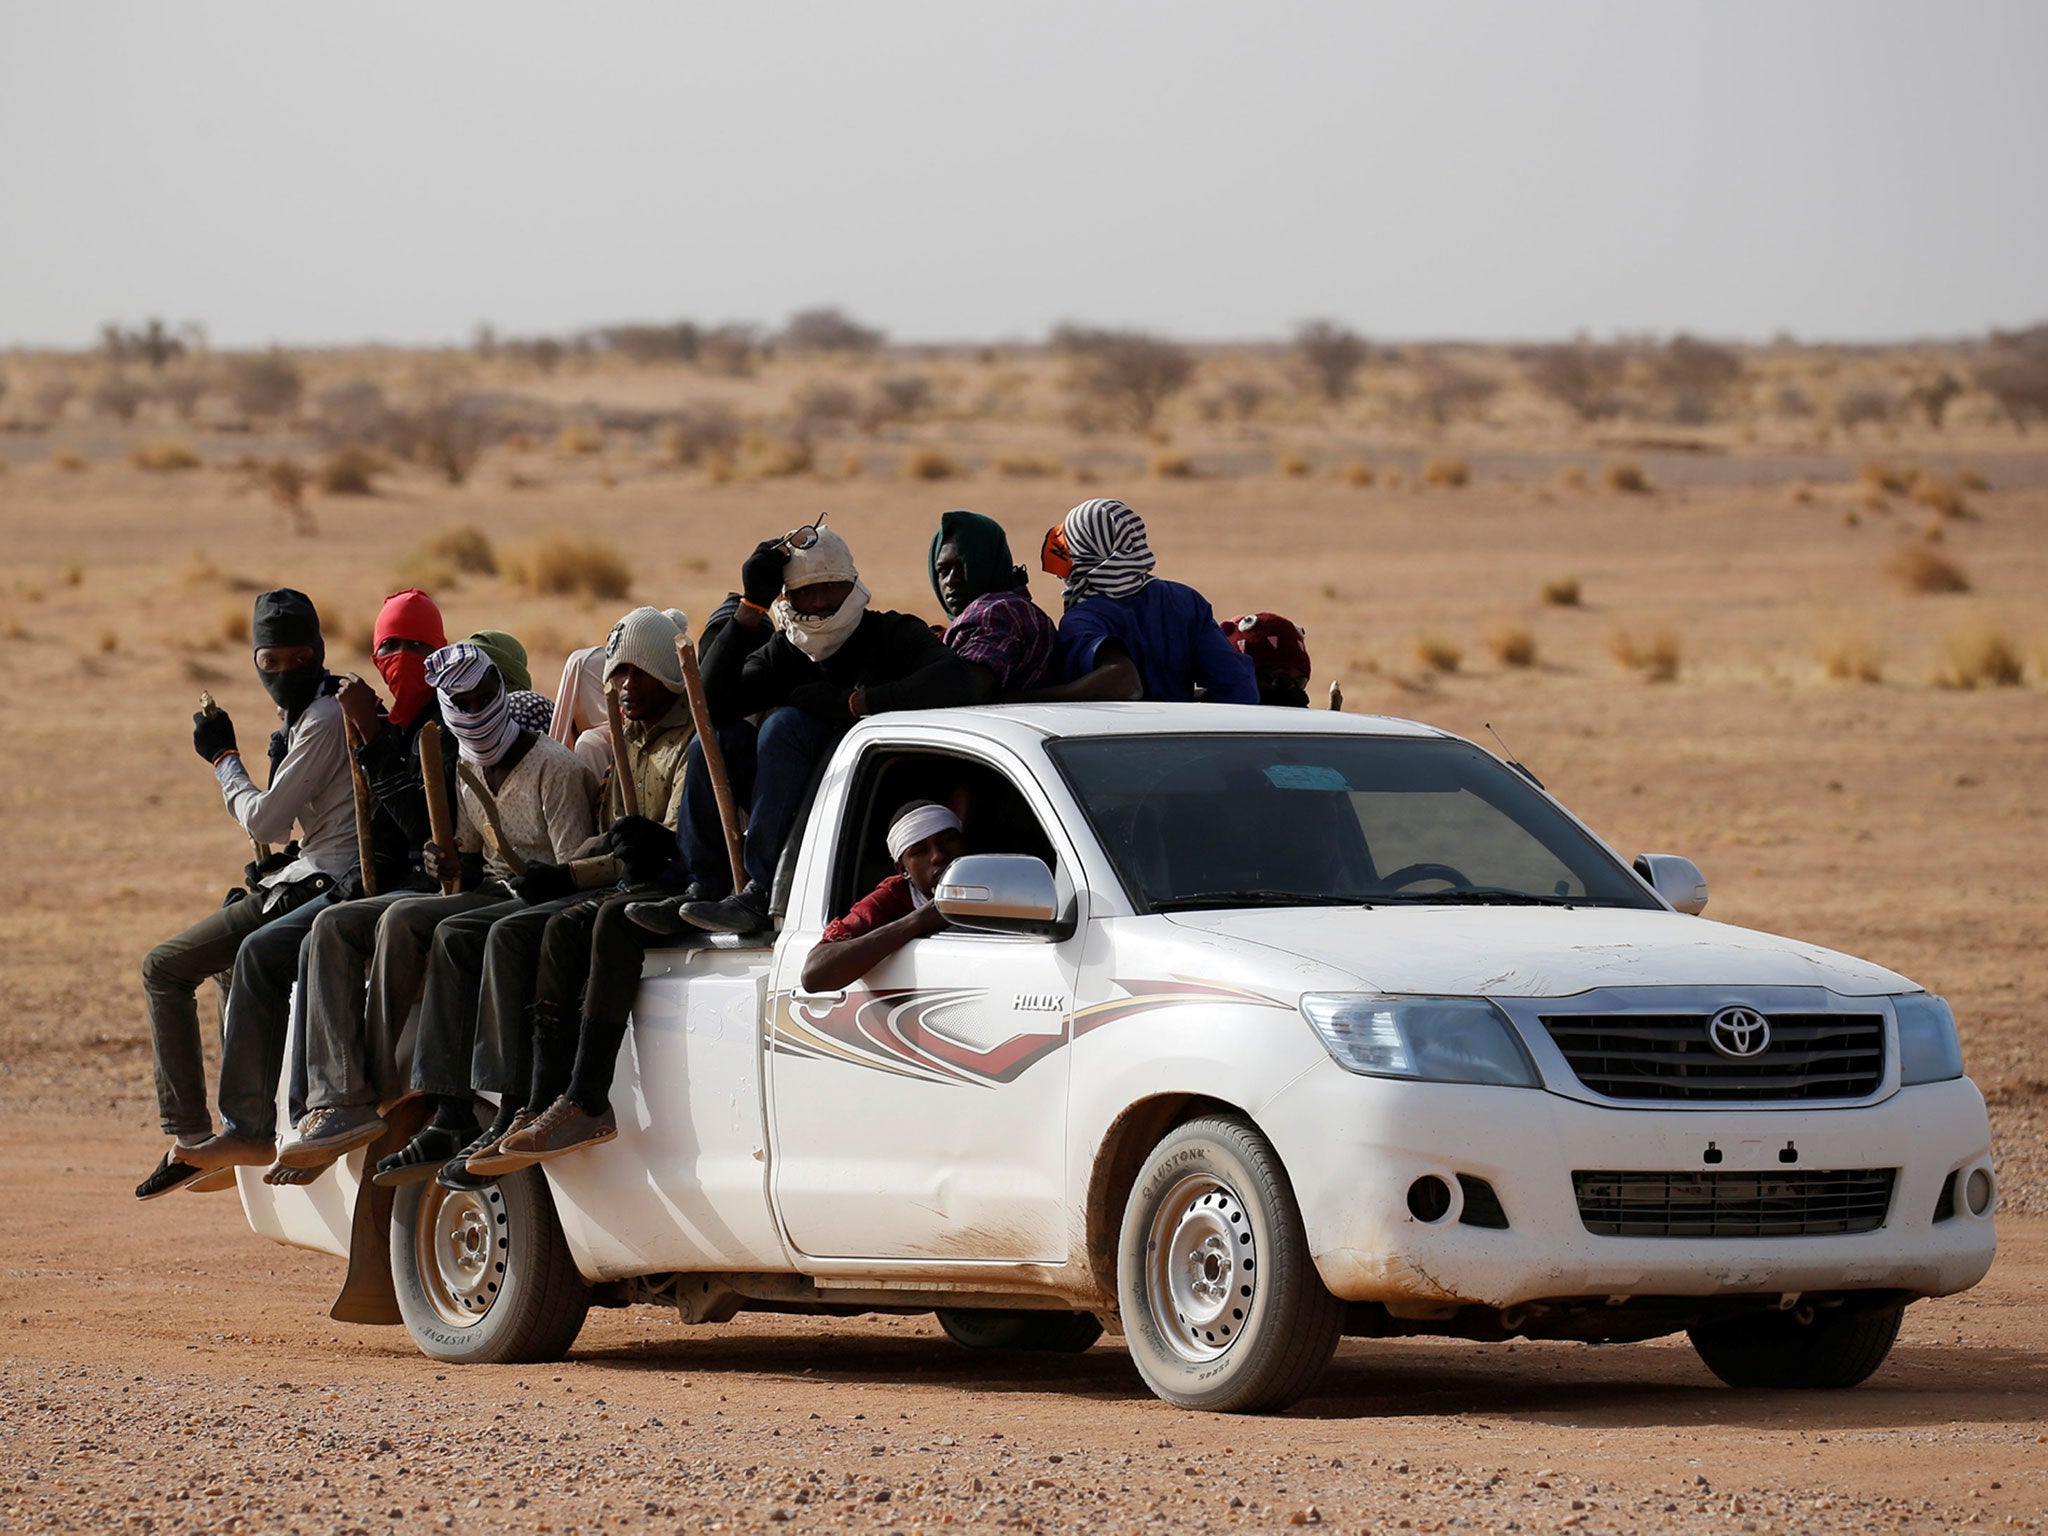 Migrants crossing the Sahara desert into Libya ride on the back of a pickup truck outside Agadez, Niger, May 9, 2016